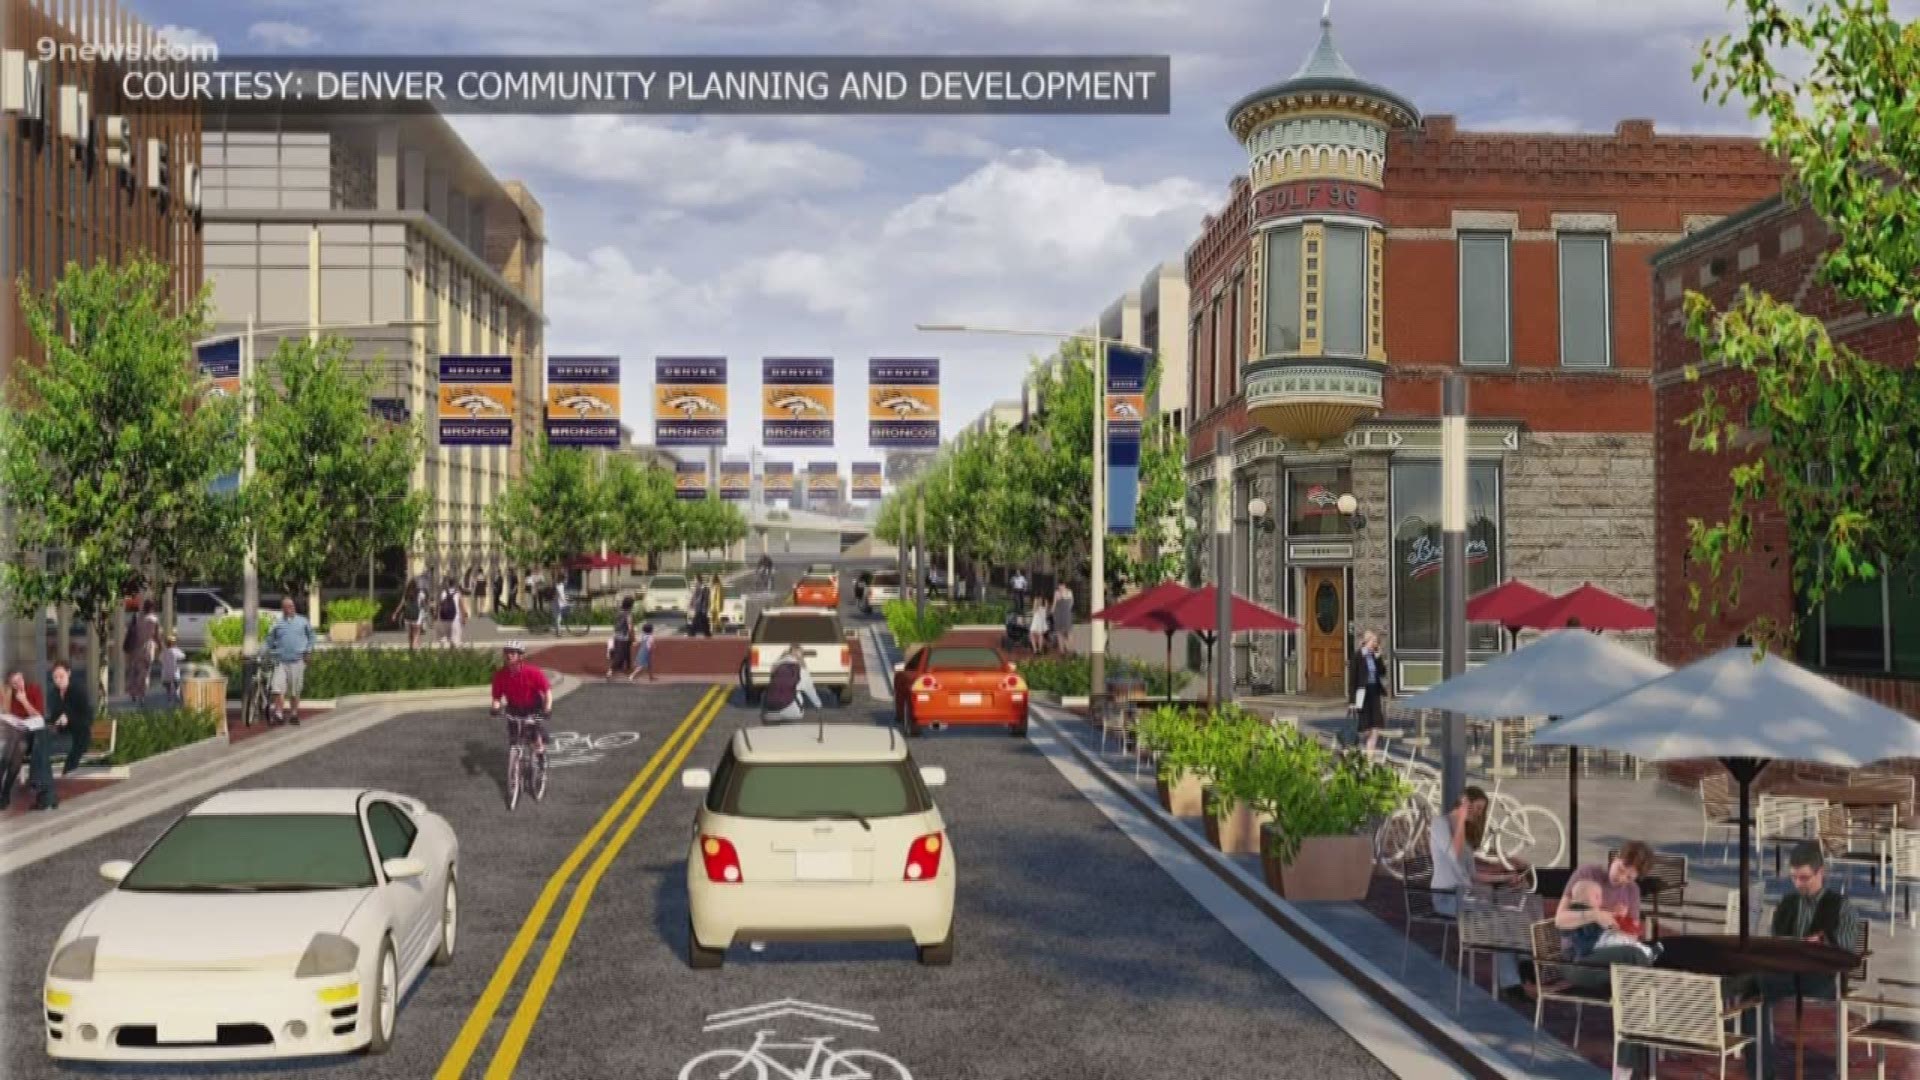 The Denver City Council voted to adopt the Stadium District Master Plan, which is aimed at creating a mixed-use development in the Broncos Stadium parking lot.